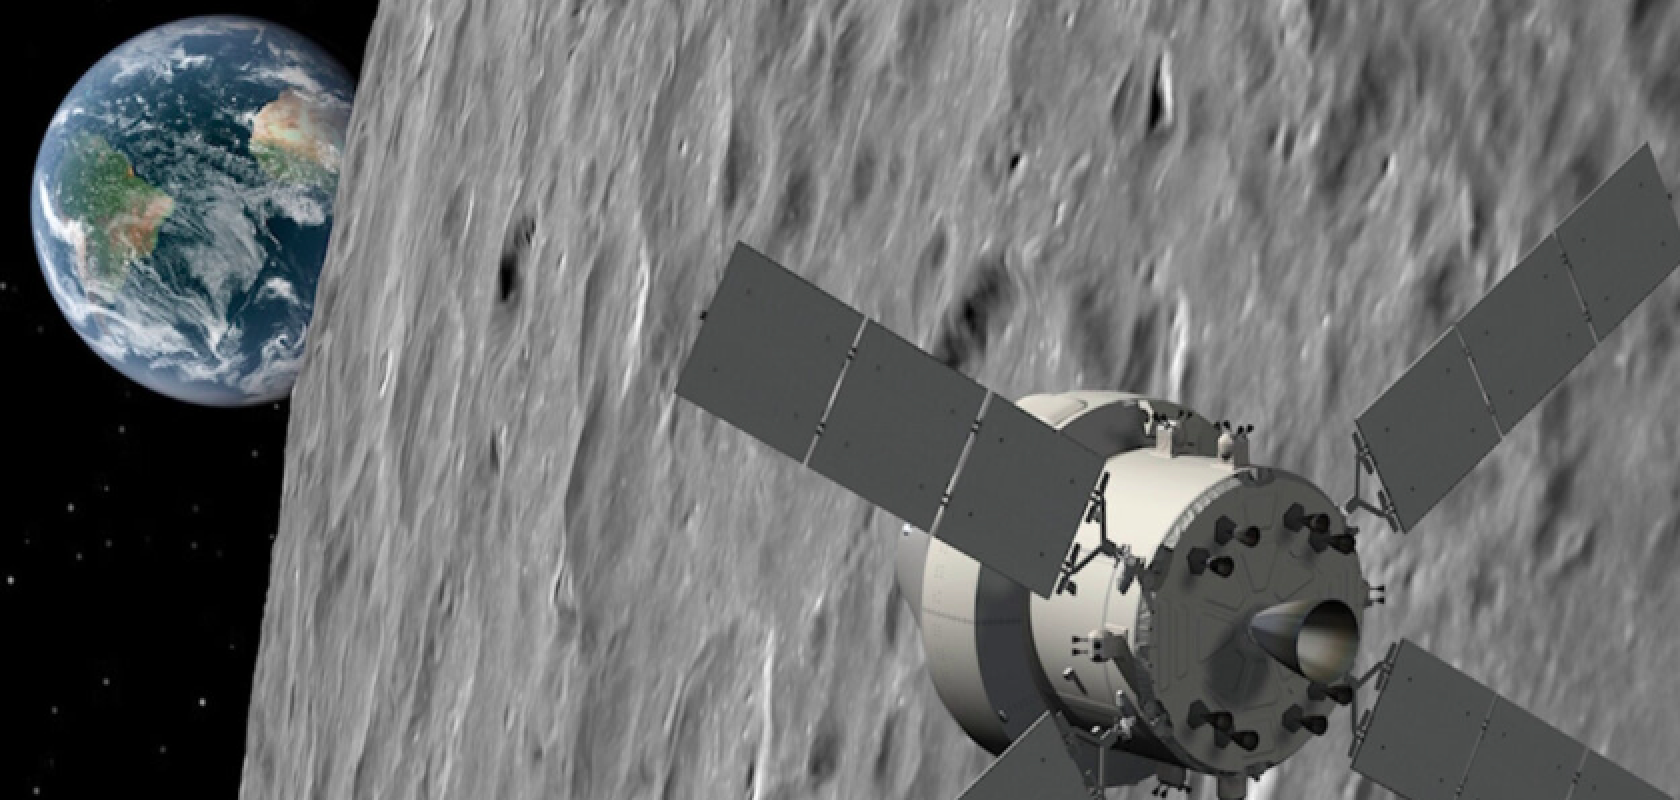 The Artemis 1 mission will use innovative technologies to explore more of the Moon's lunar surface (Image: European Space Agency) 